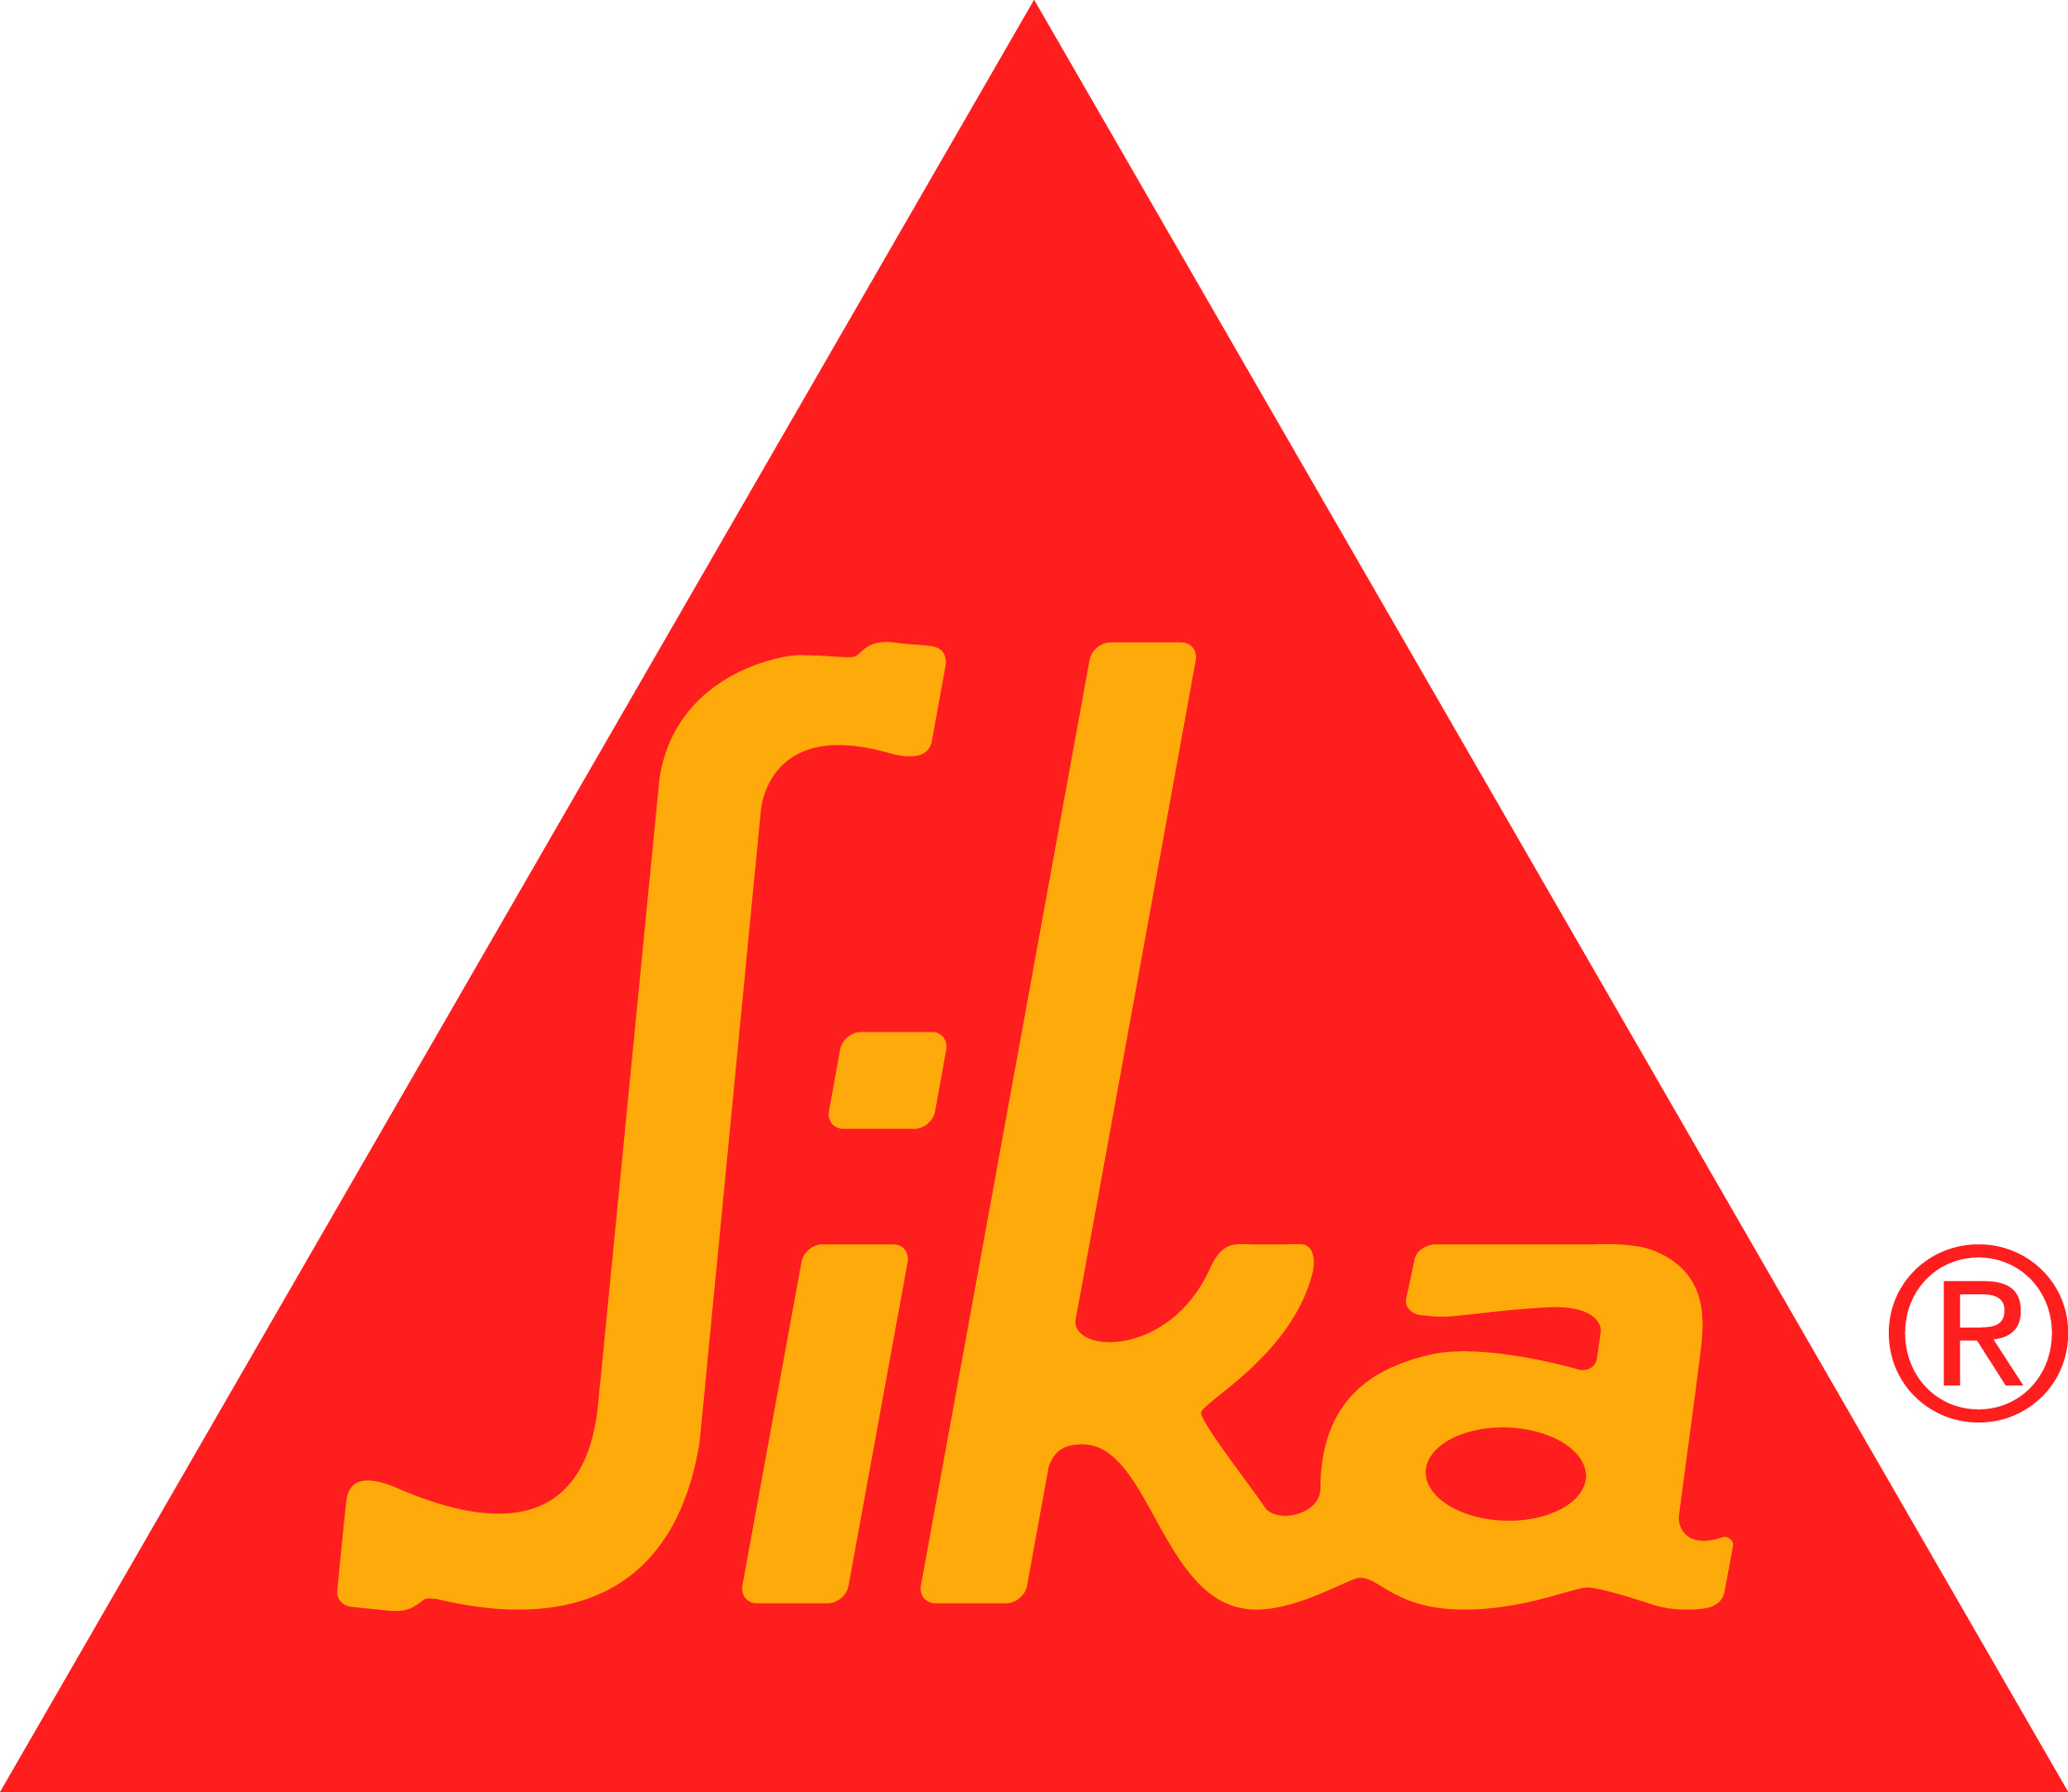 Sika 1a Color Chart